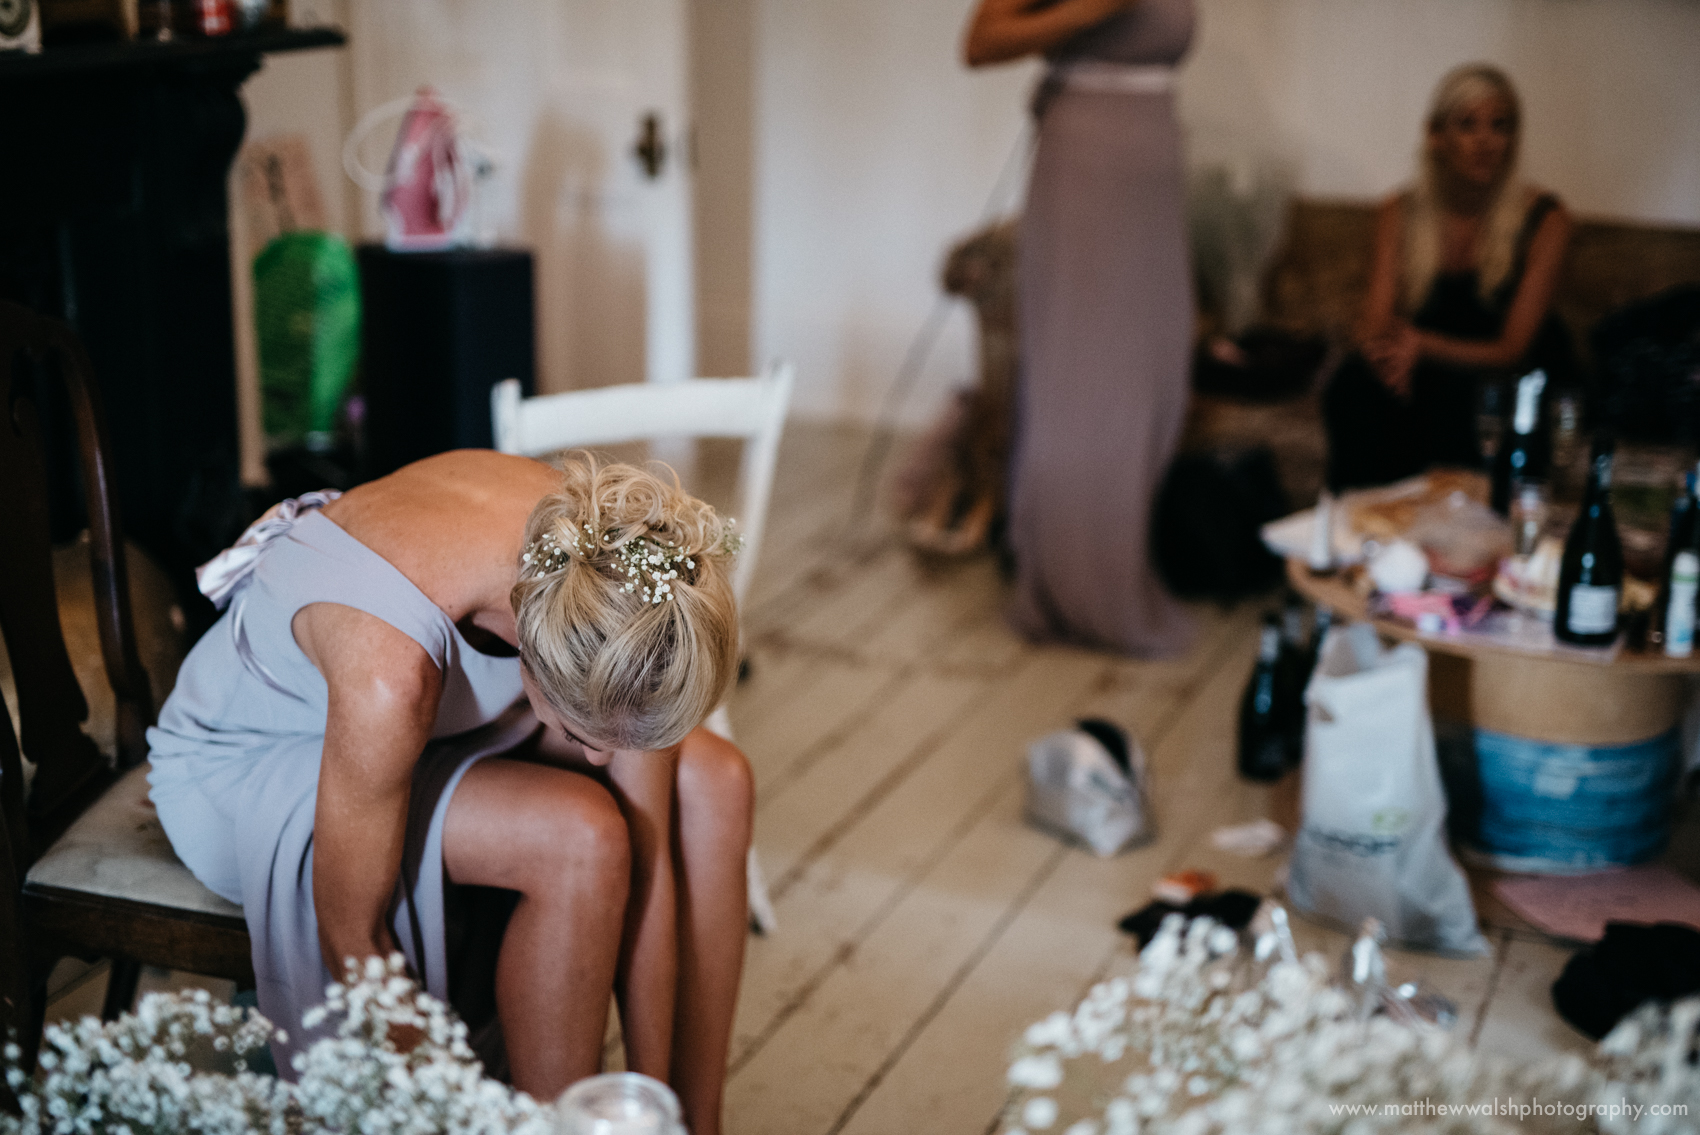 One of the bridesmaids putting her shoes on